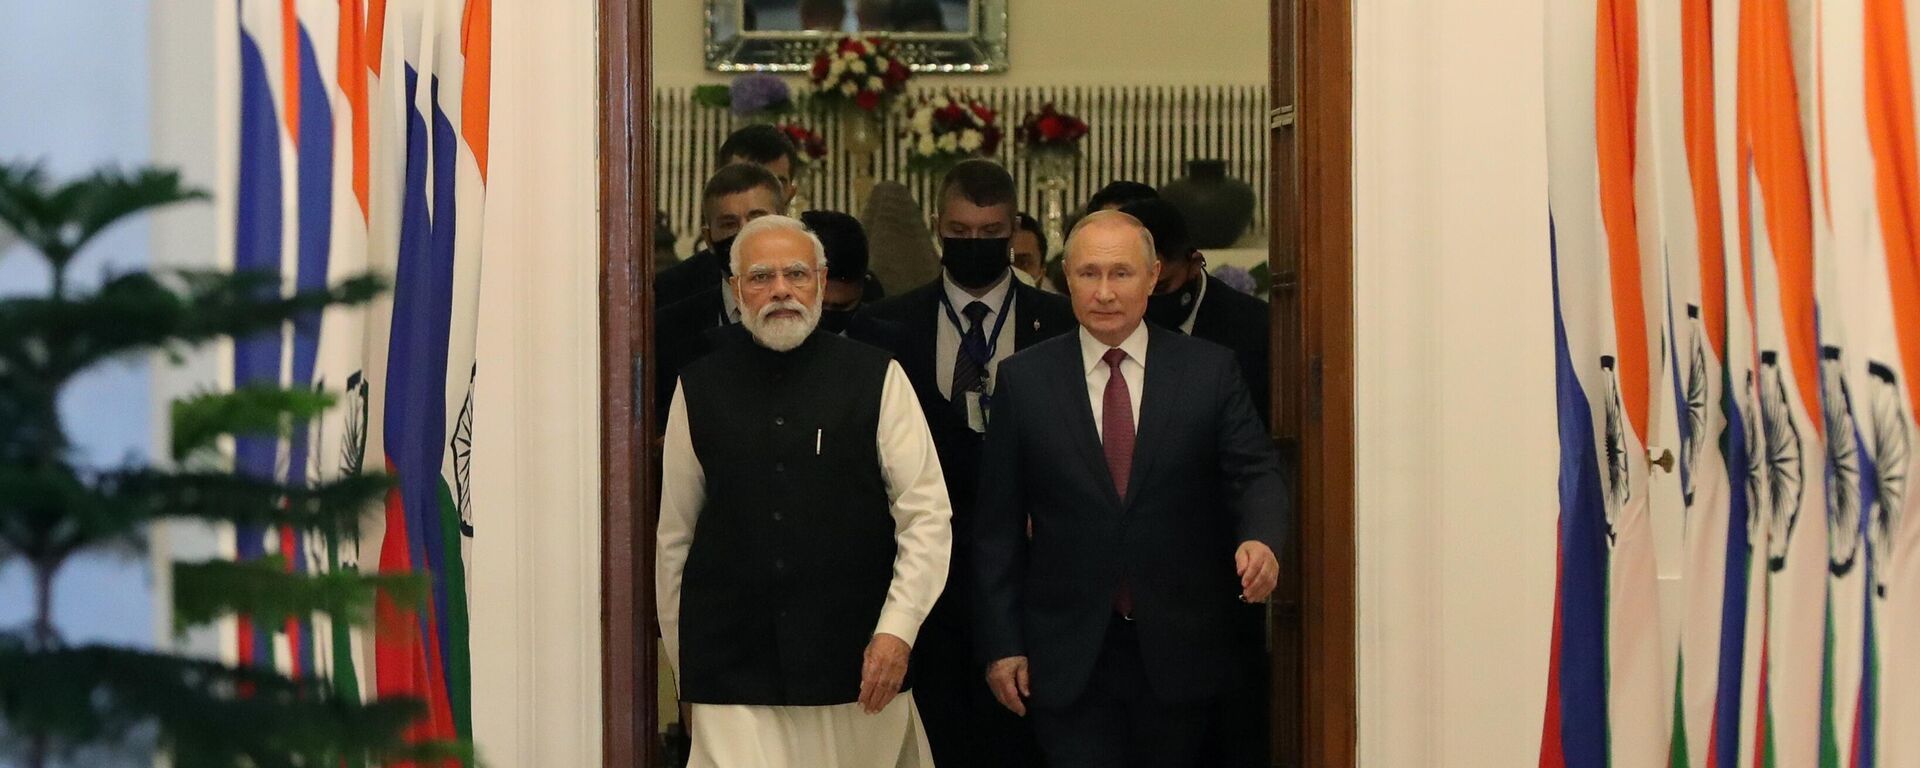  Russian President Vladimir Putin and Prime Minister of the Republic of India Narendra Modi (left) during a meeting at the Hyderabad Palace in New Delh - Sputnik International, 1920, 06.12.2021